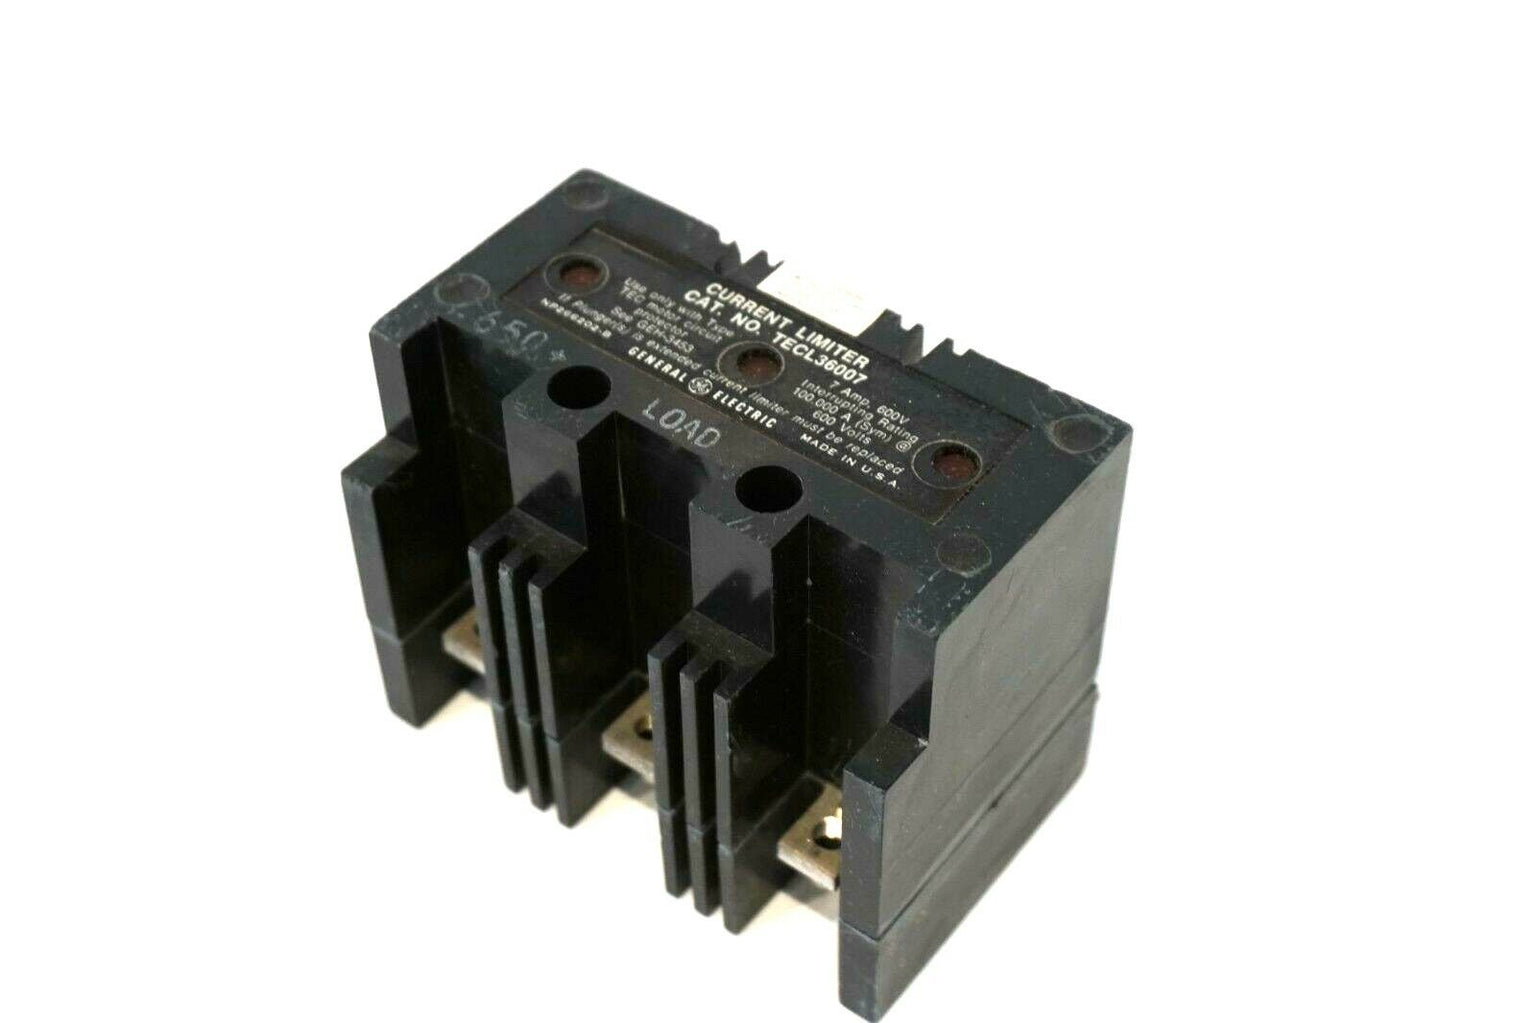 TECL36007 - General Electrics - Molded Case Circuit Breakers